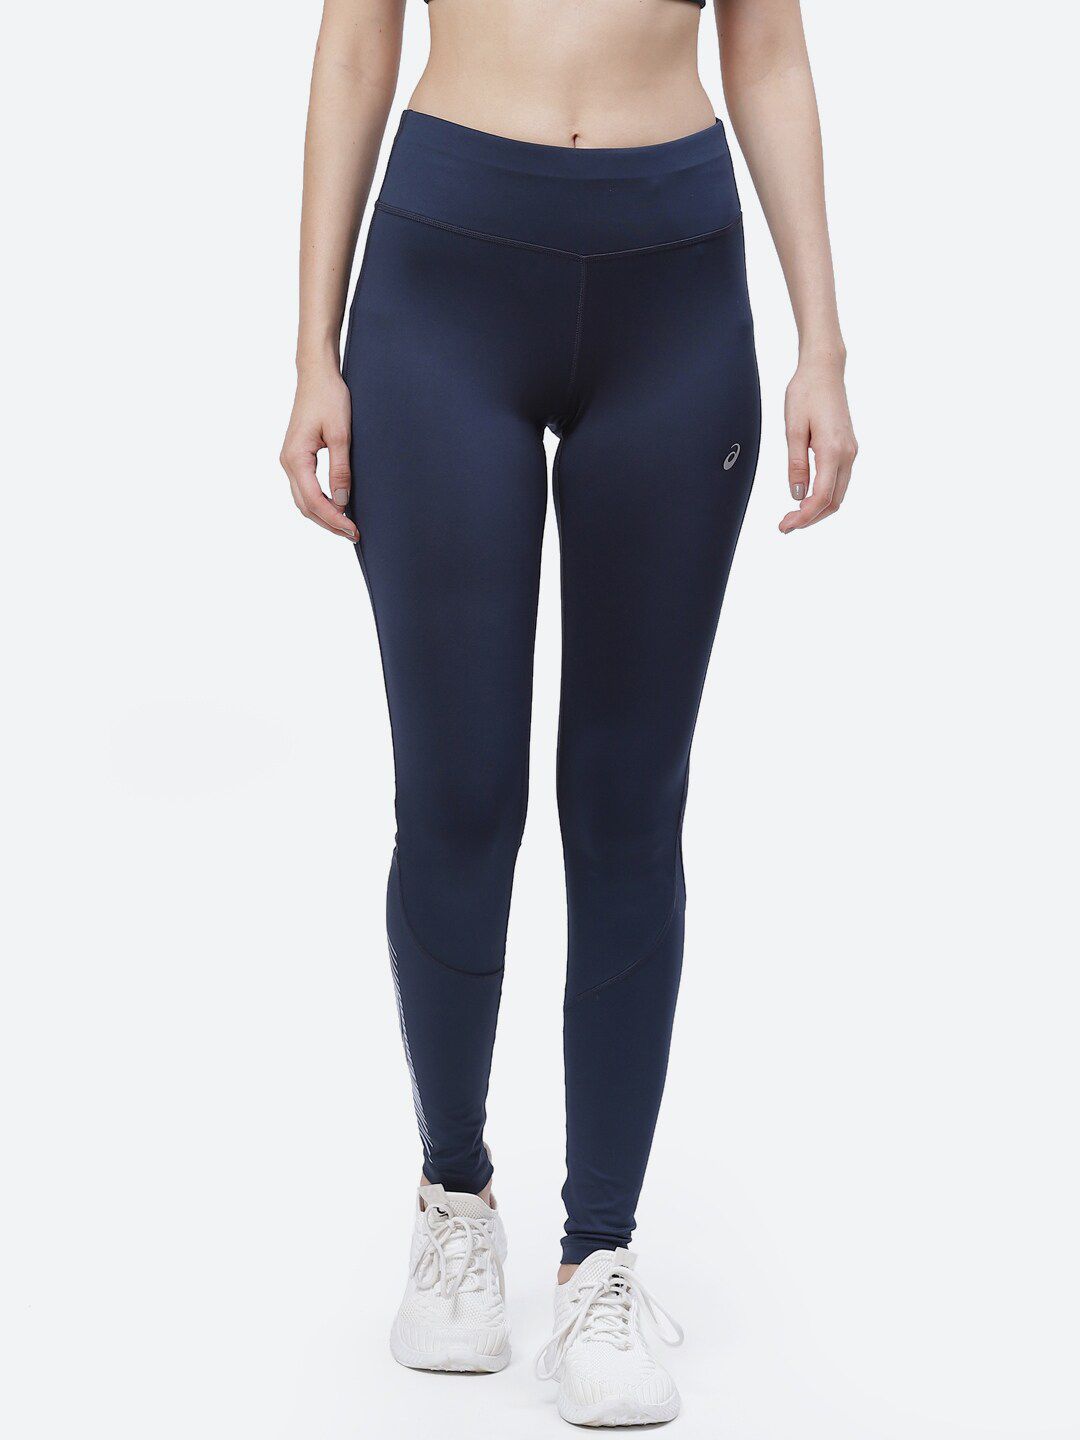 ASICS Women Navy Blue Solid Tights ICON Price in India